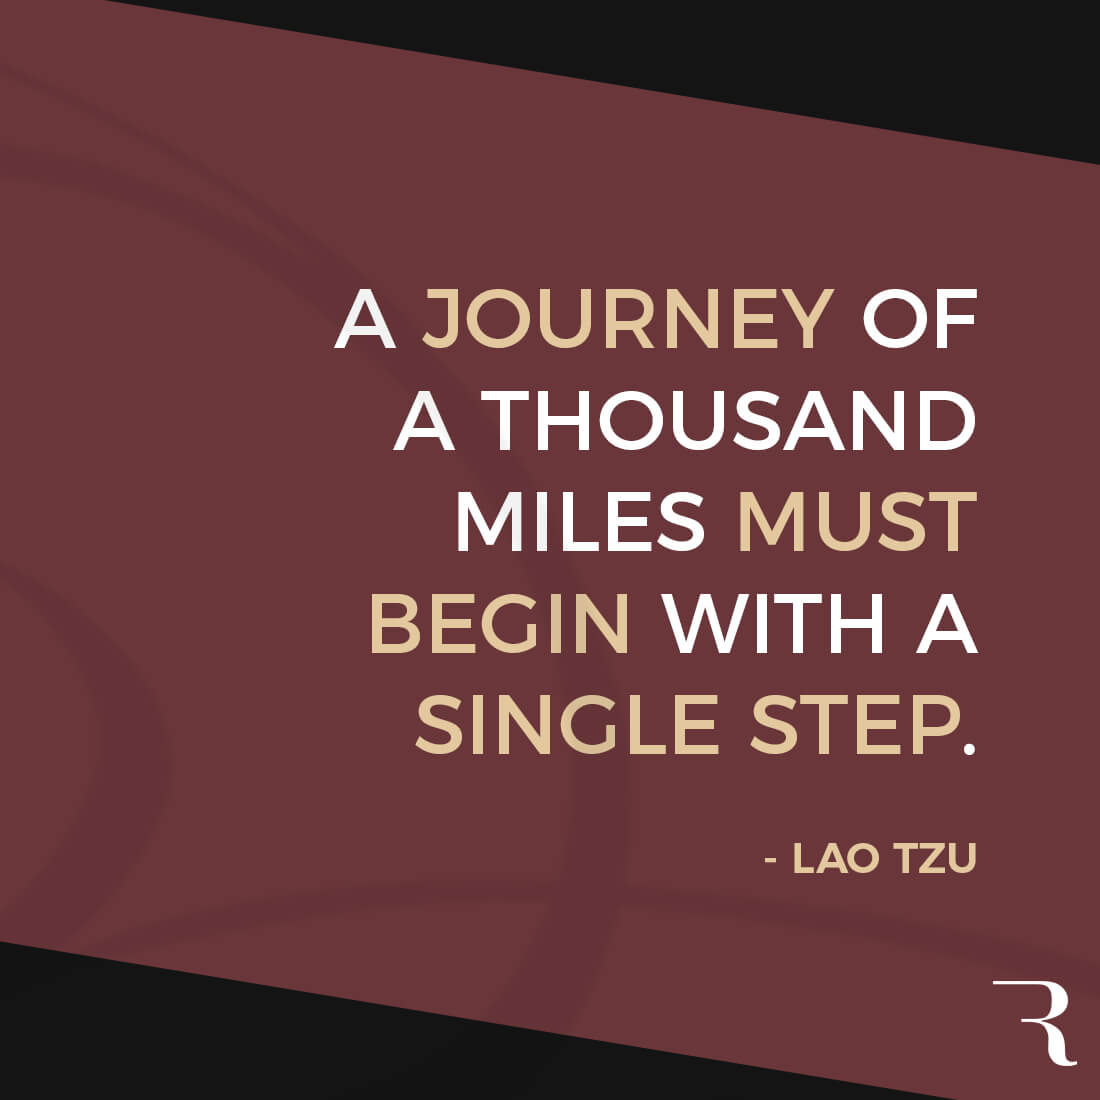 Motivational Quotes: "A journey of a thousand miles must begin with a single step." 112 Motivational Quotes to Be a Better Entrepreneur